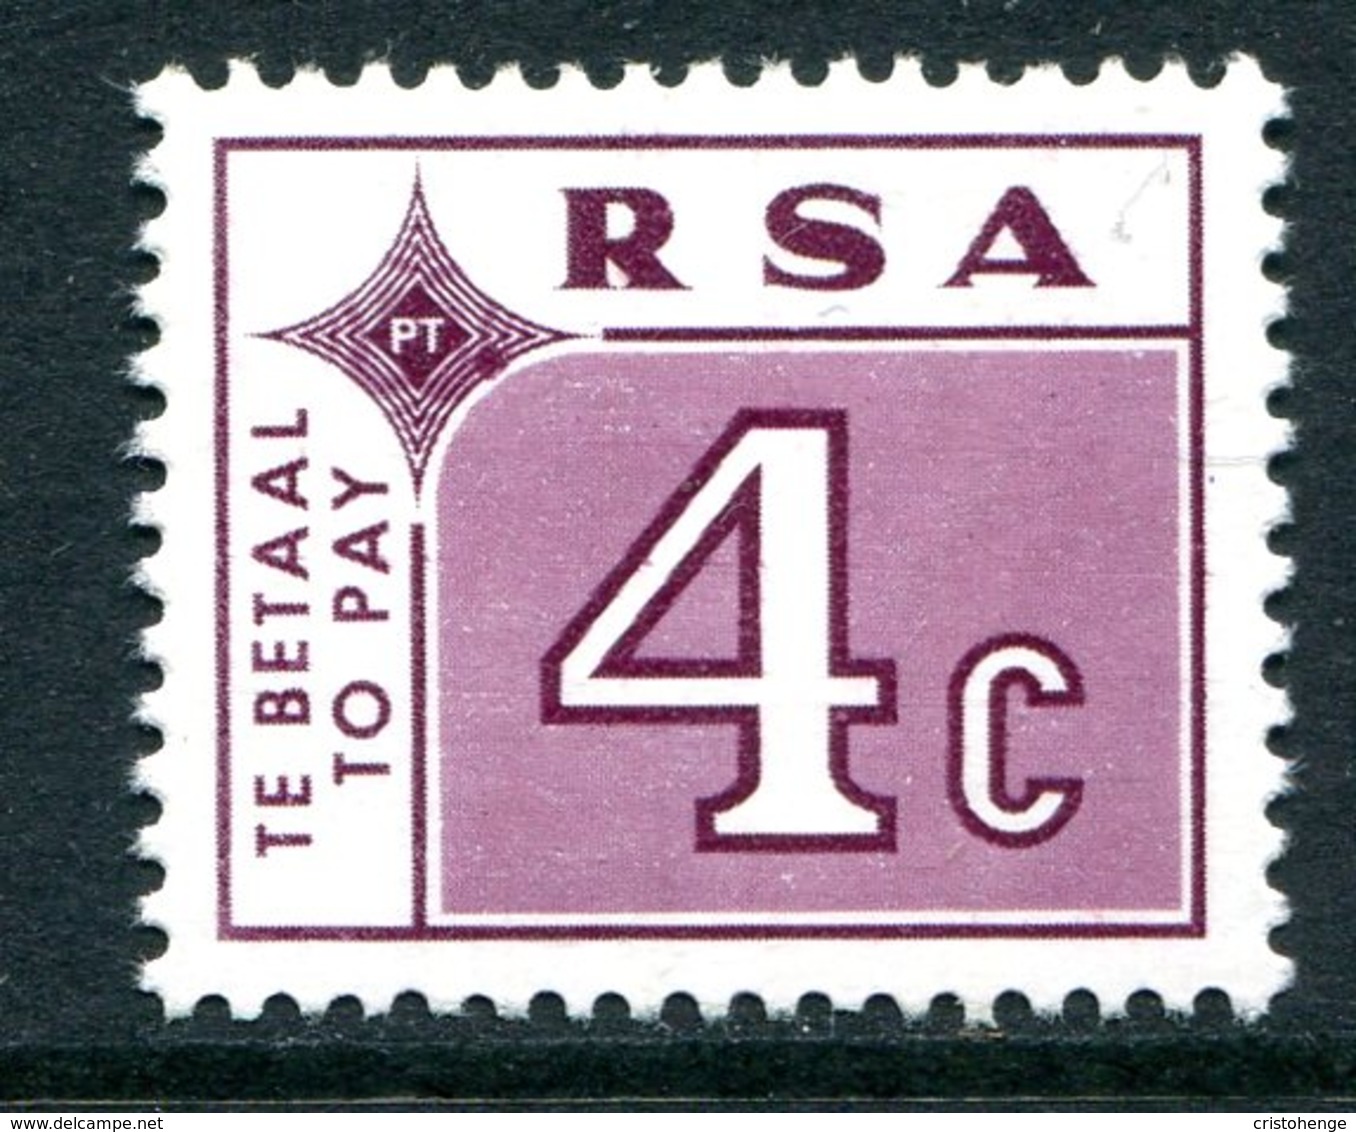 South Africa 1972 Postage Dues - 4c Plum MNH (SG D77) - Postage Due